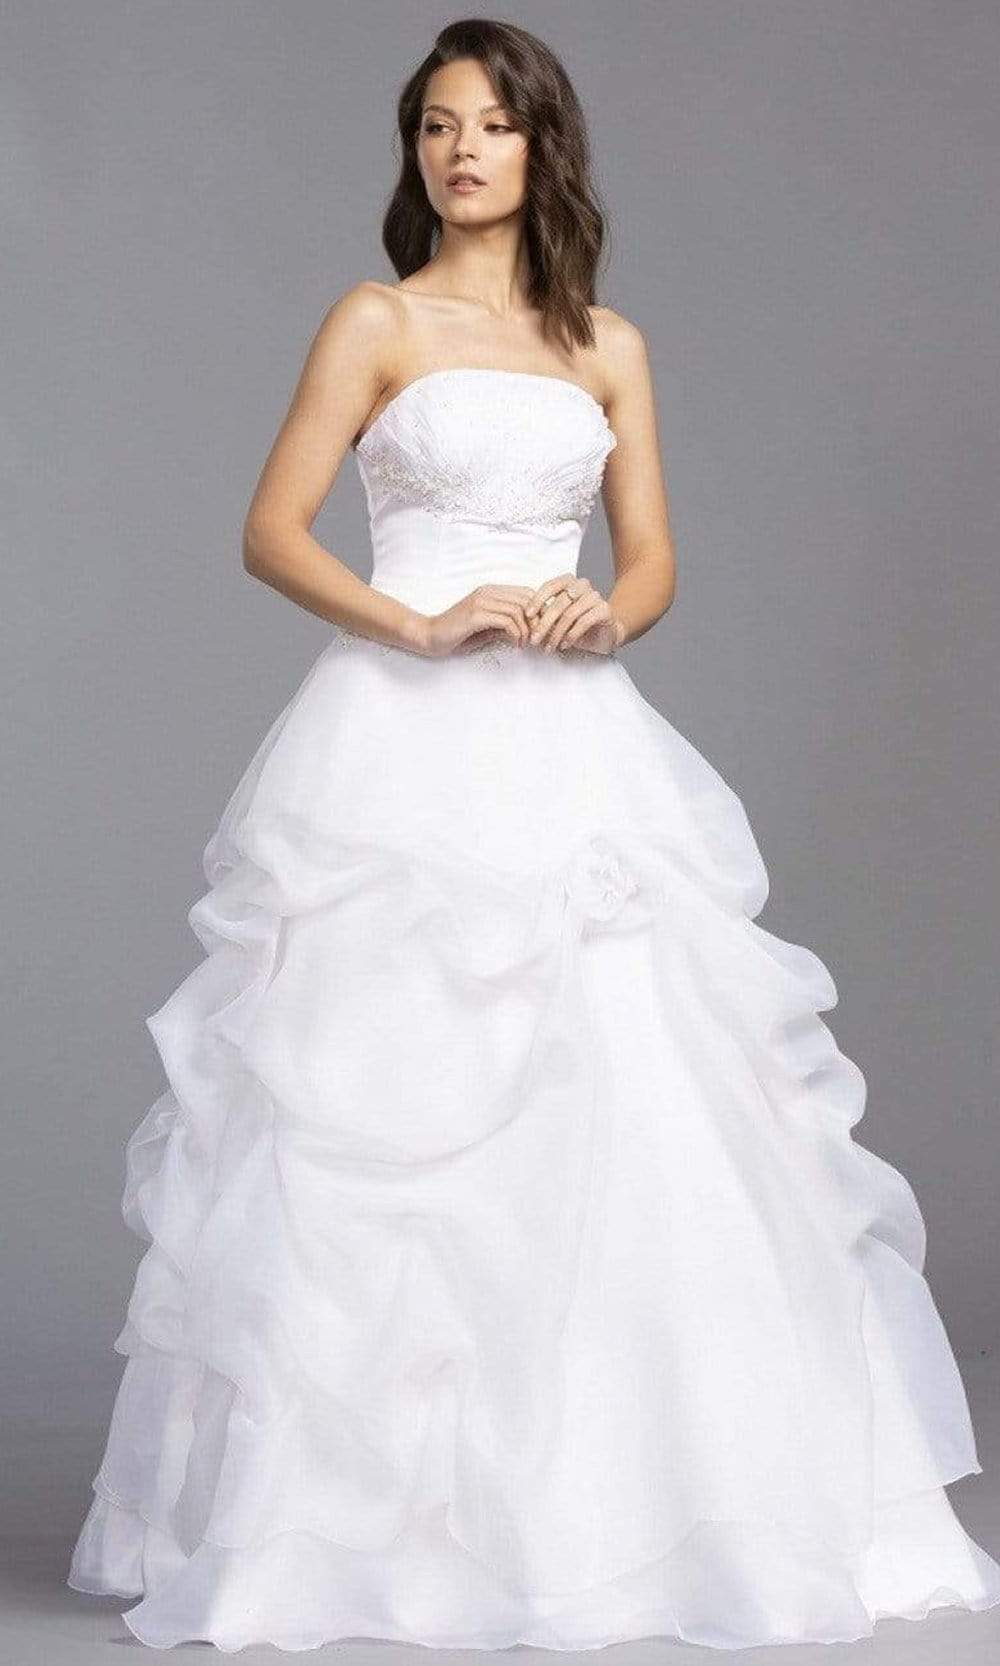 Image of Aspeed Bridal - LH039 Straight Neck Layered Soft Tulle Dress